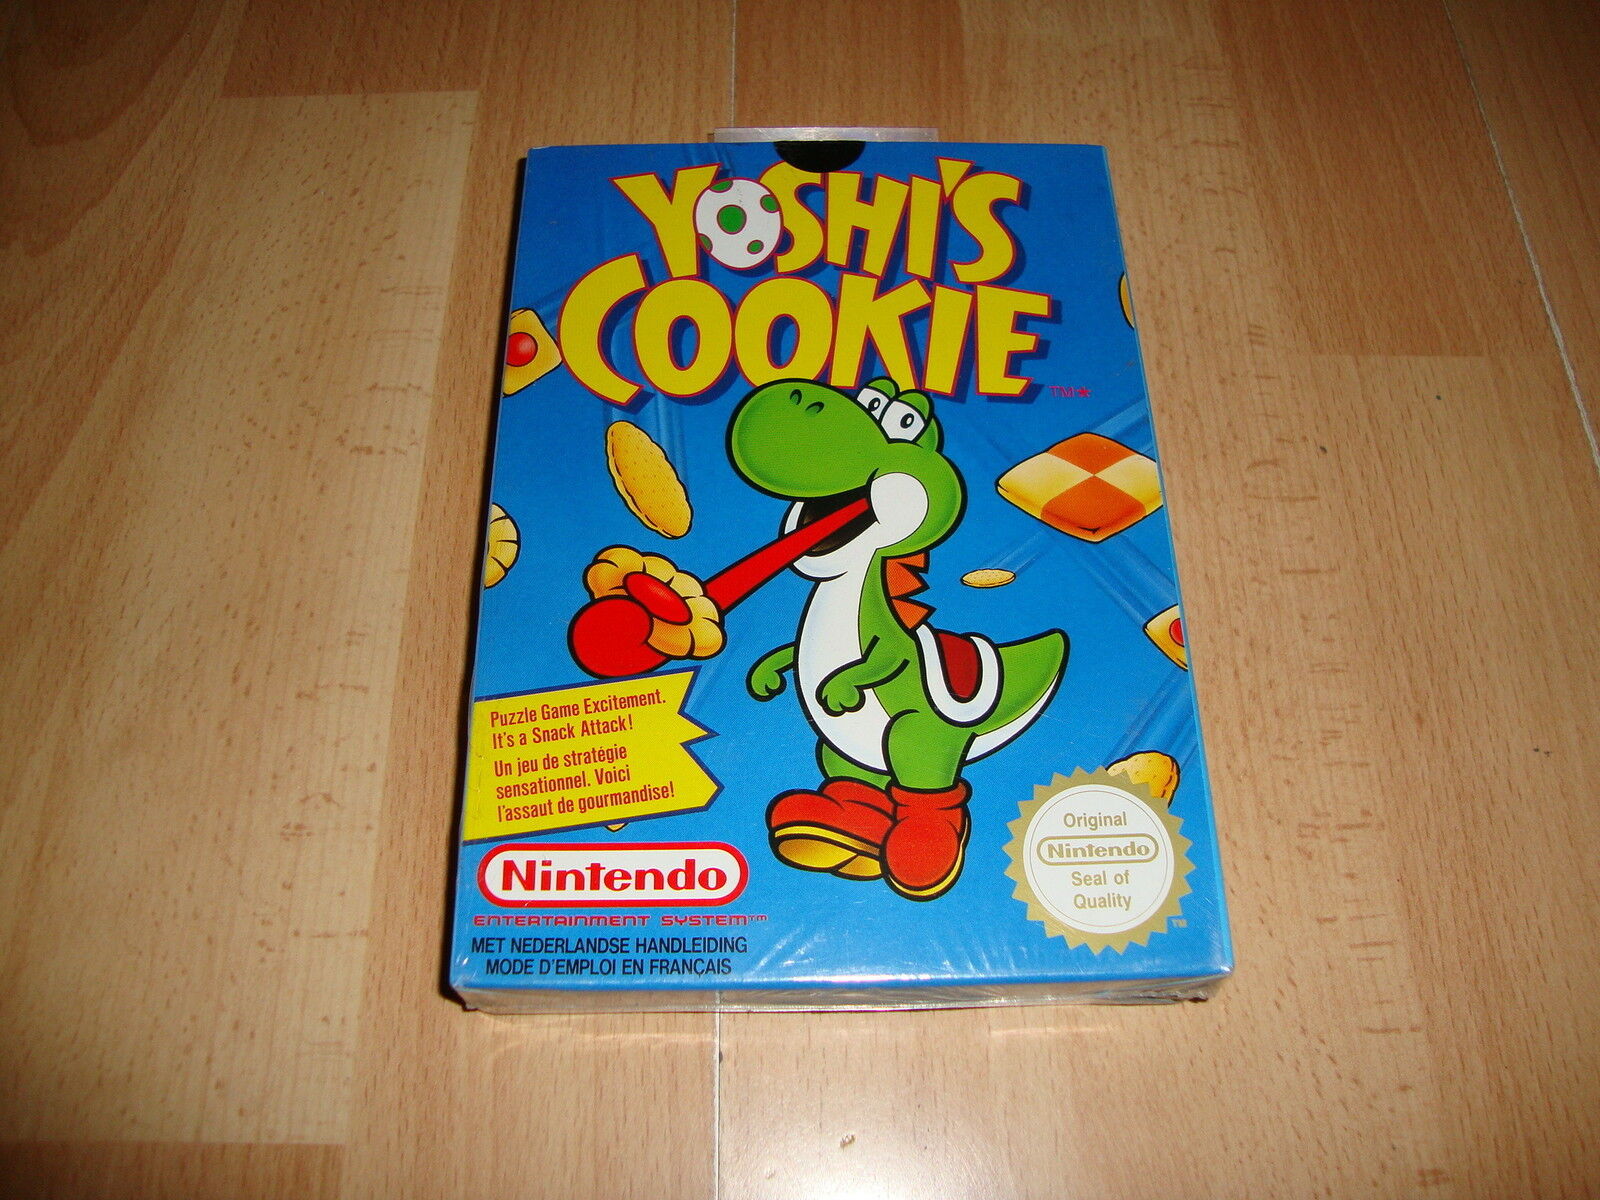 YOSHI'S COOKIE FOR NINTENDO NES NEW FACTORY SEALED BACK BOX IN ENGLISH - FRENCH